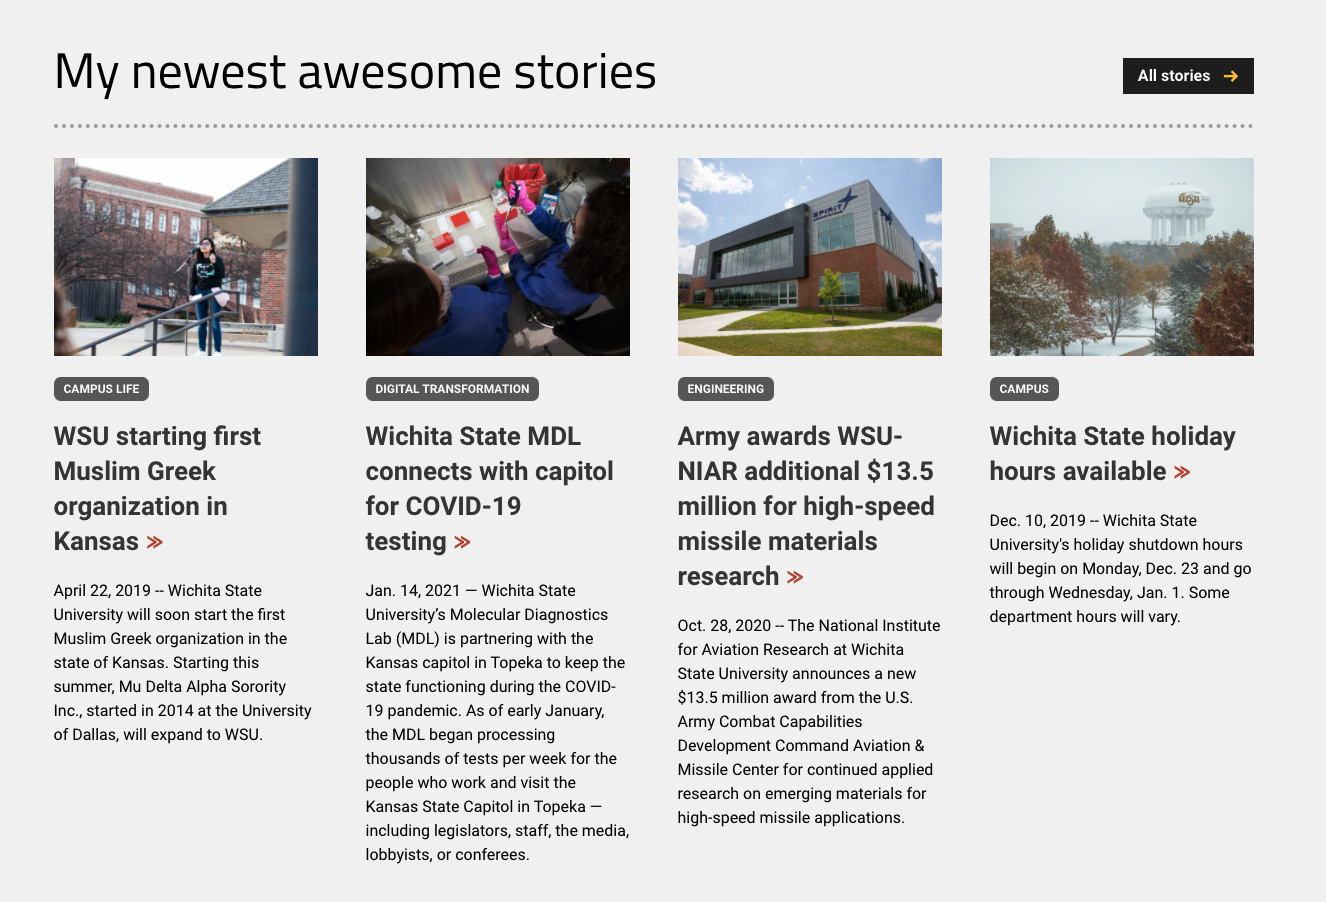 Building News Sections on the WSU site